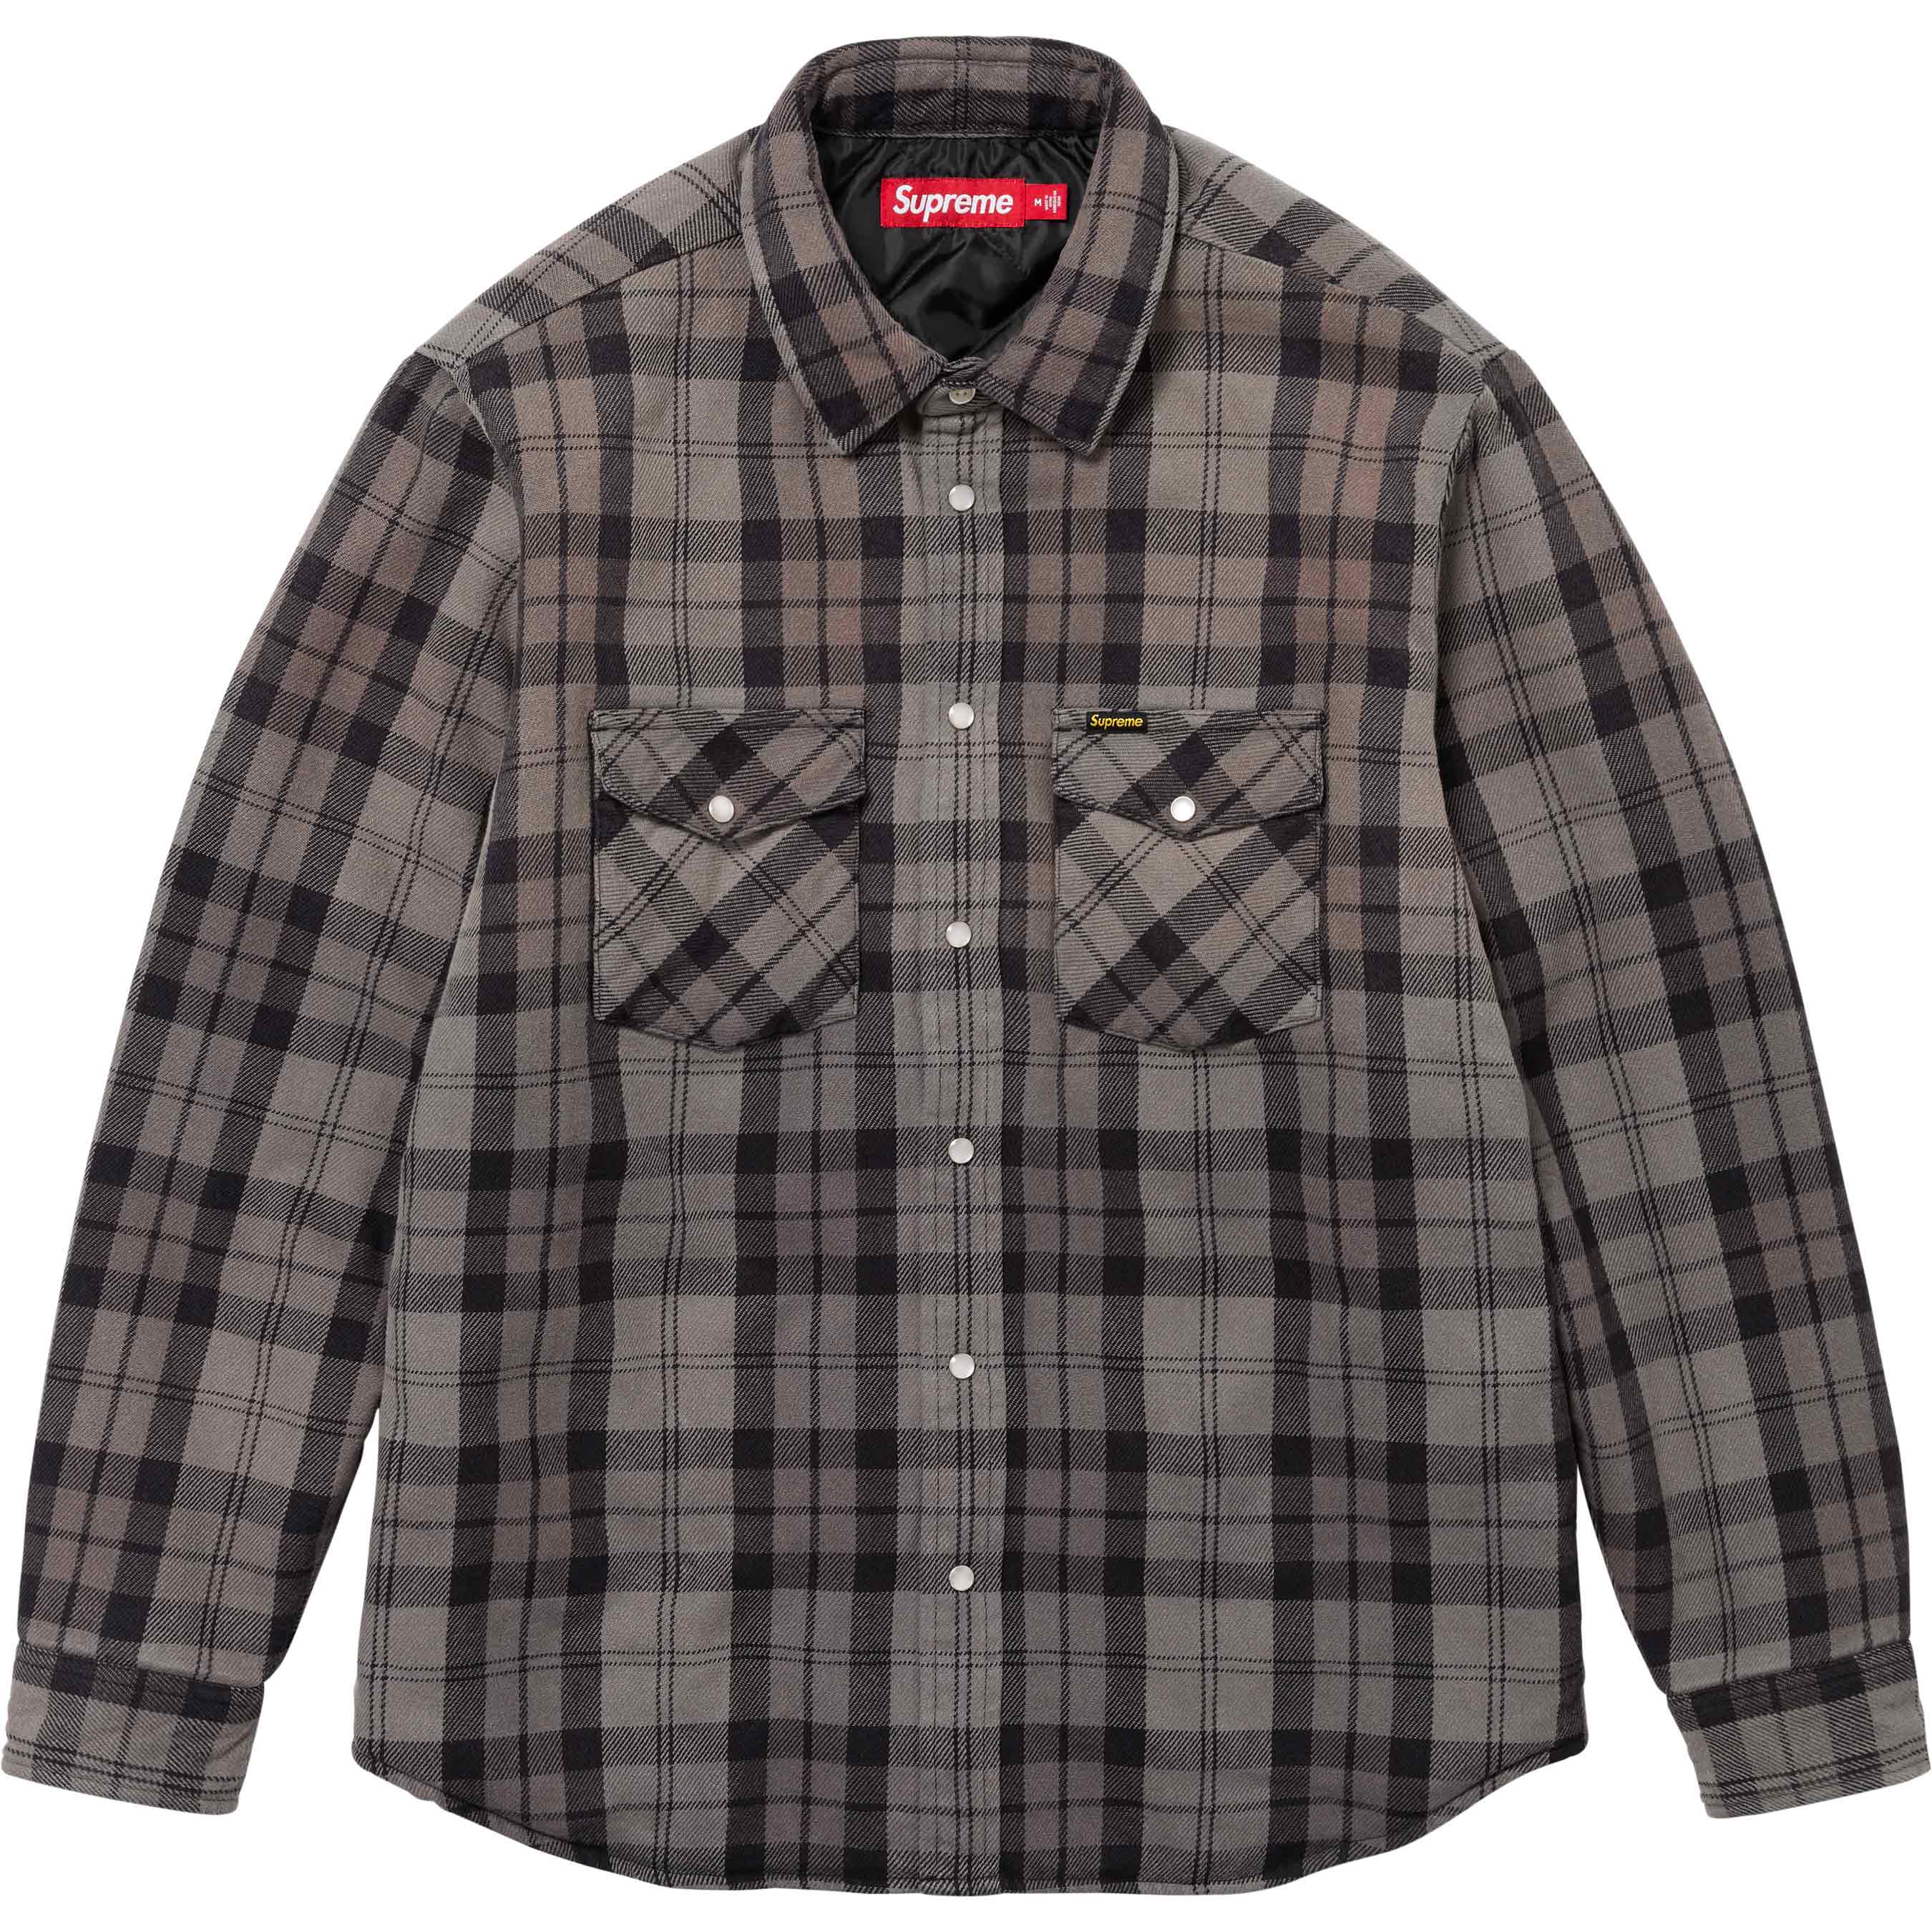 Berne Men's Quilt-Lined Flannel Shirt Jacket at Tractor Supply Co.